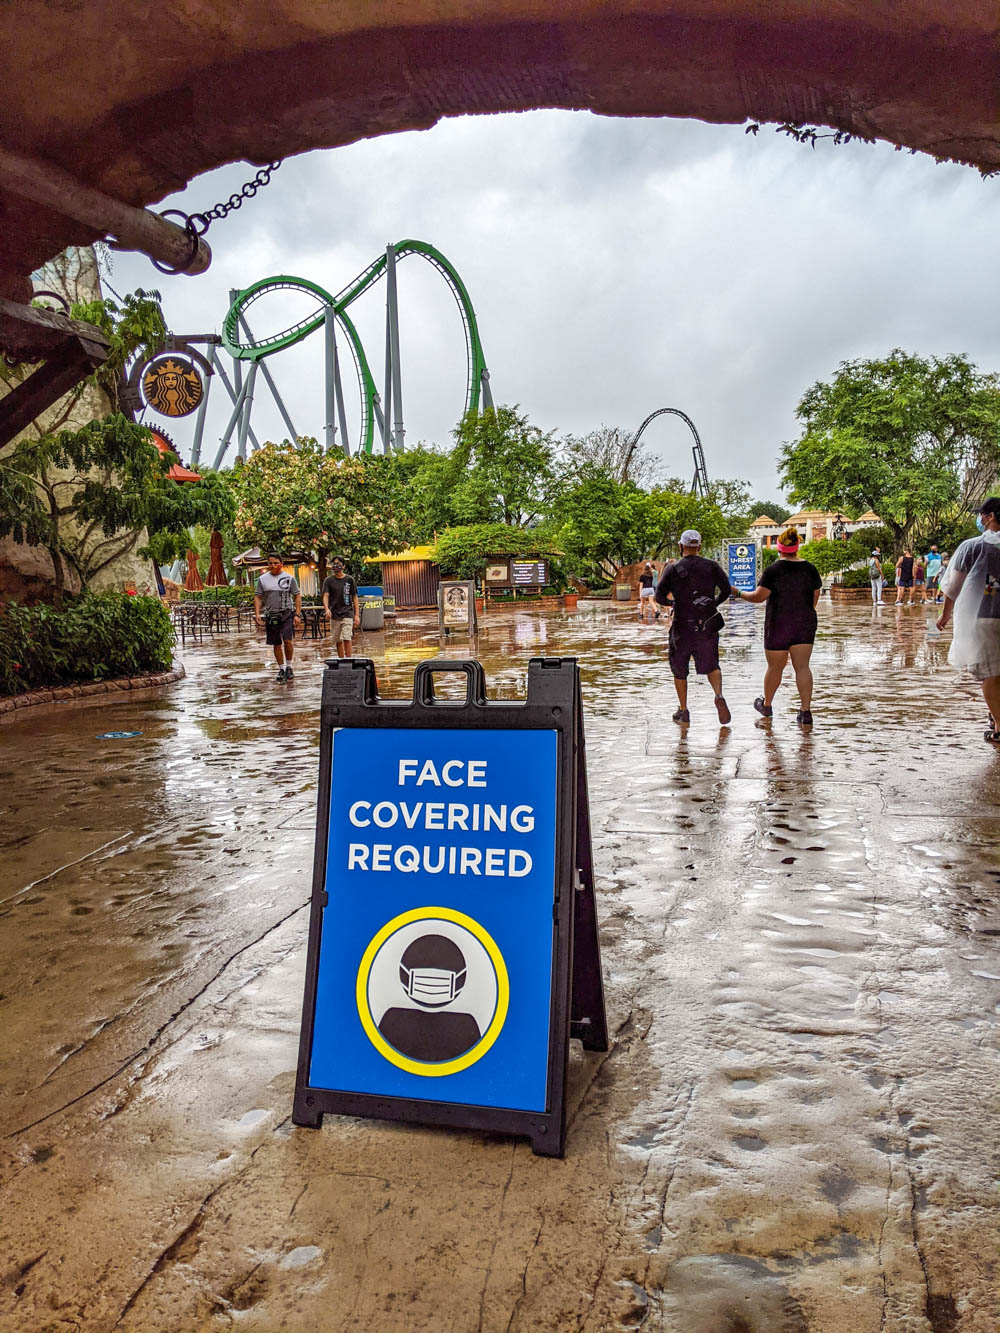 Face covering sign at Universal Orlando during the pandemic